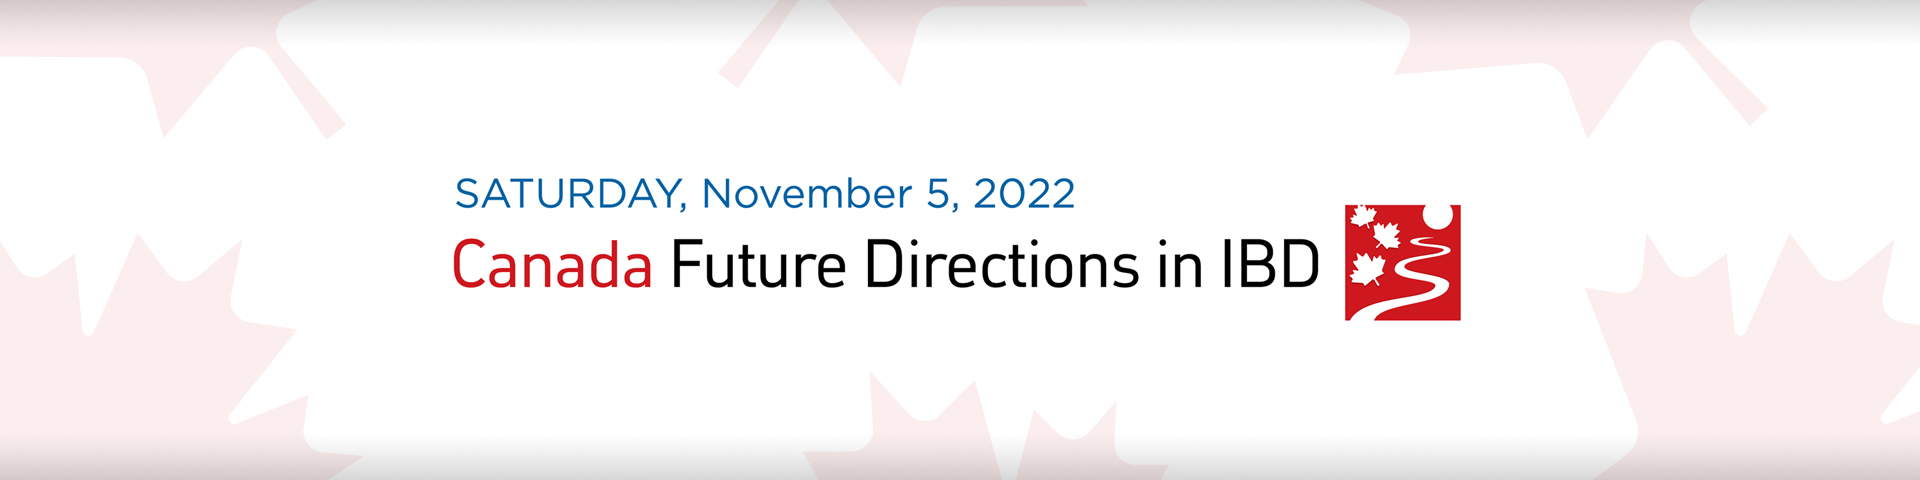 Canada Future Directions in IBD Banner